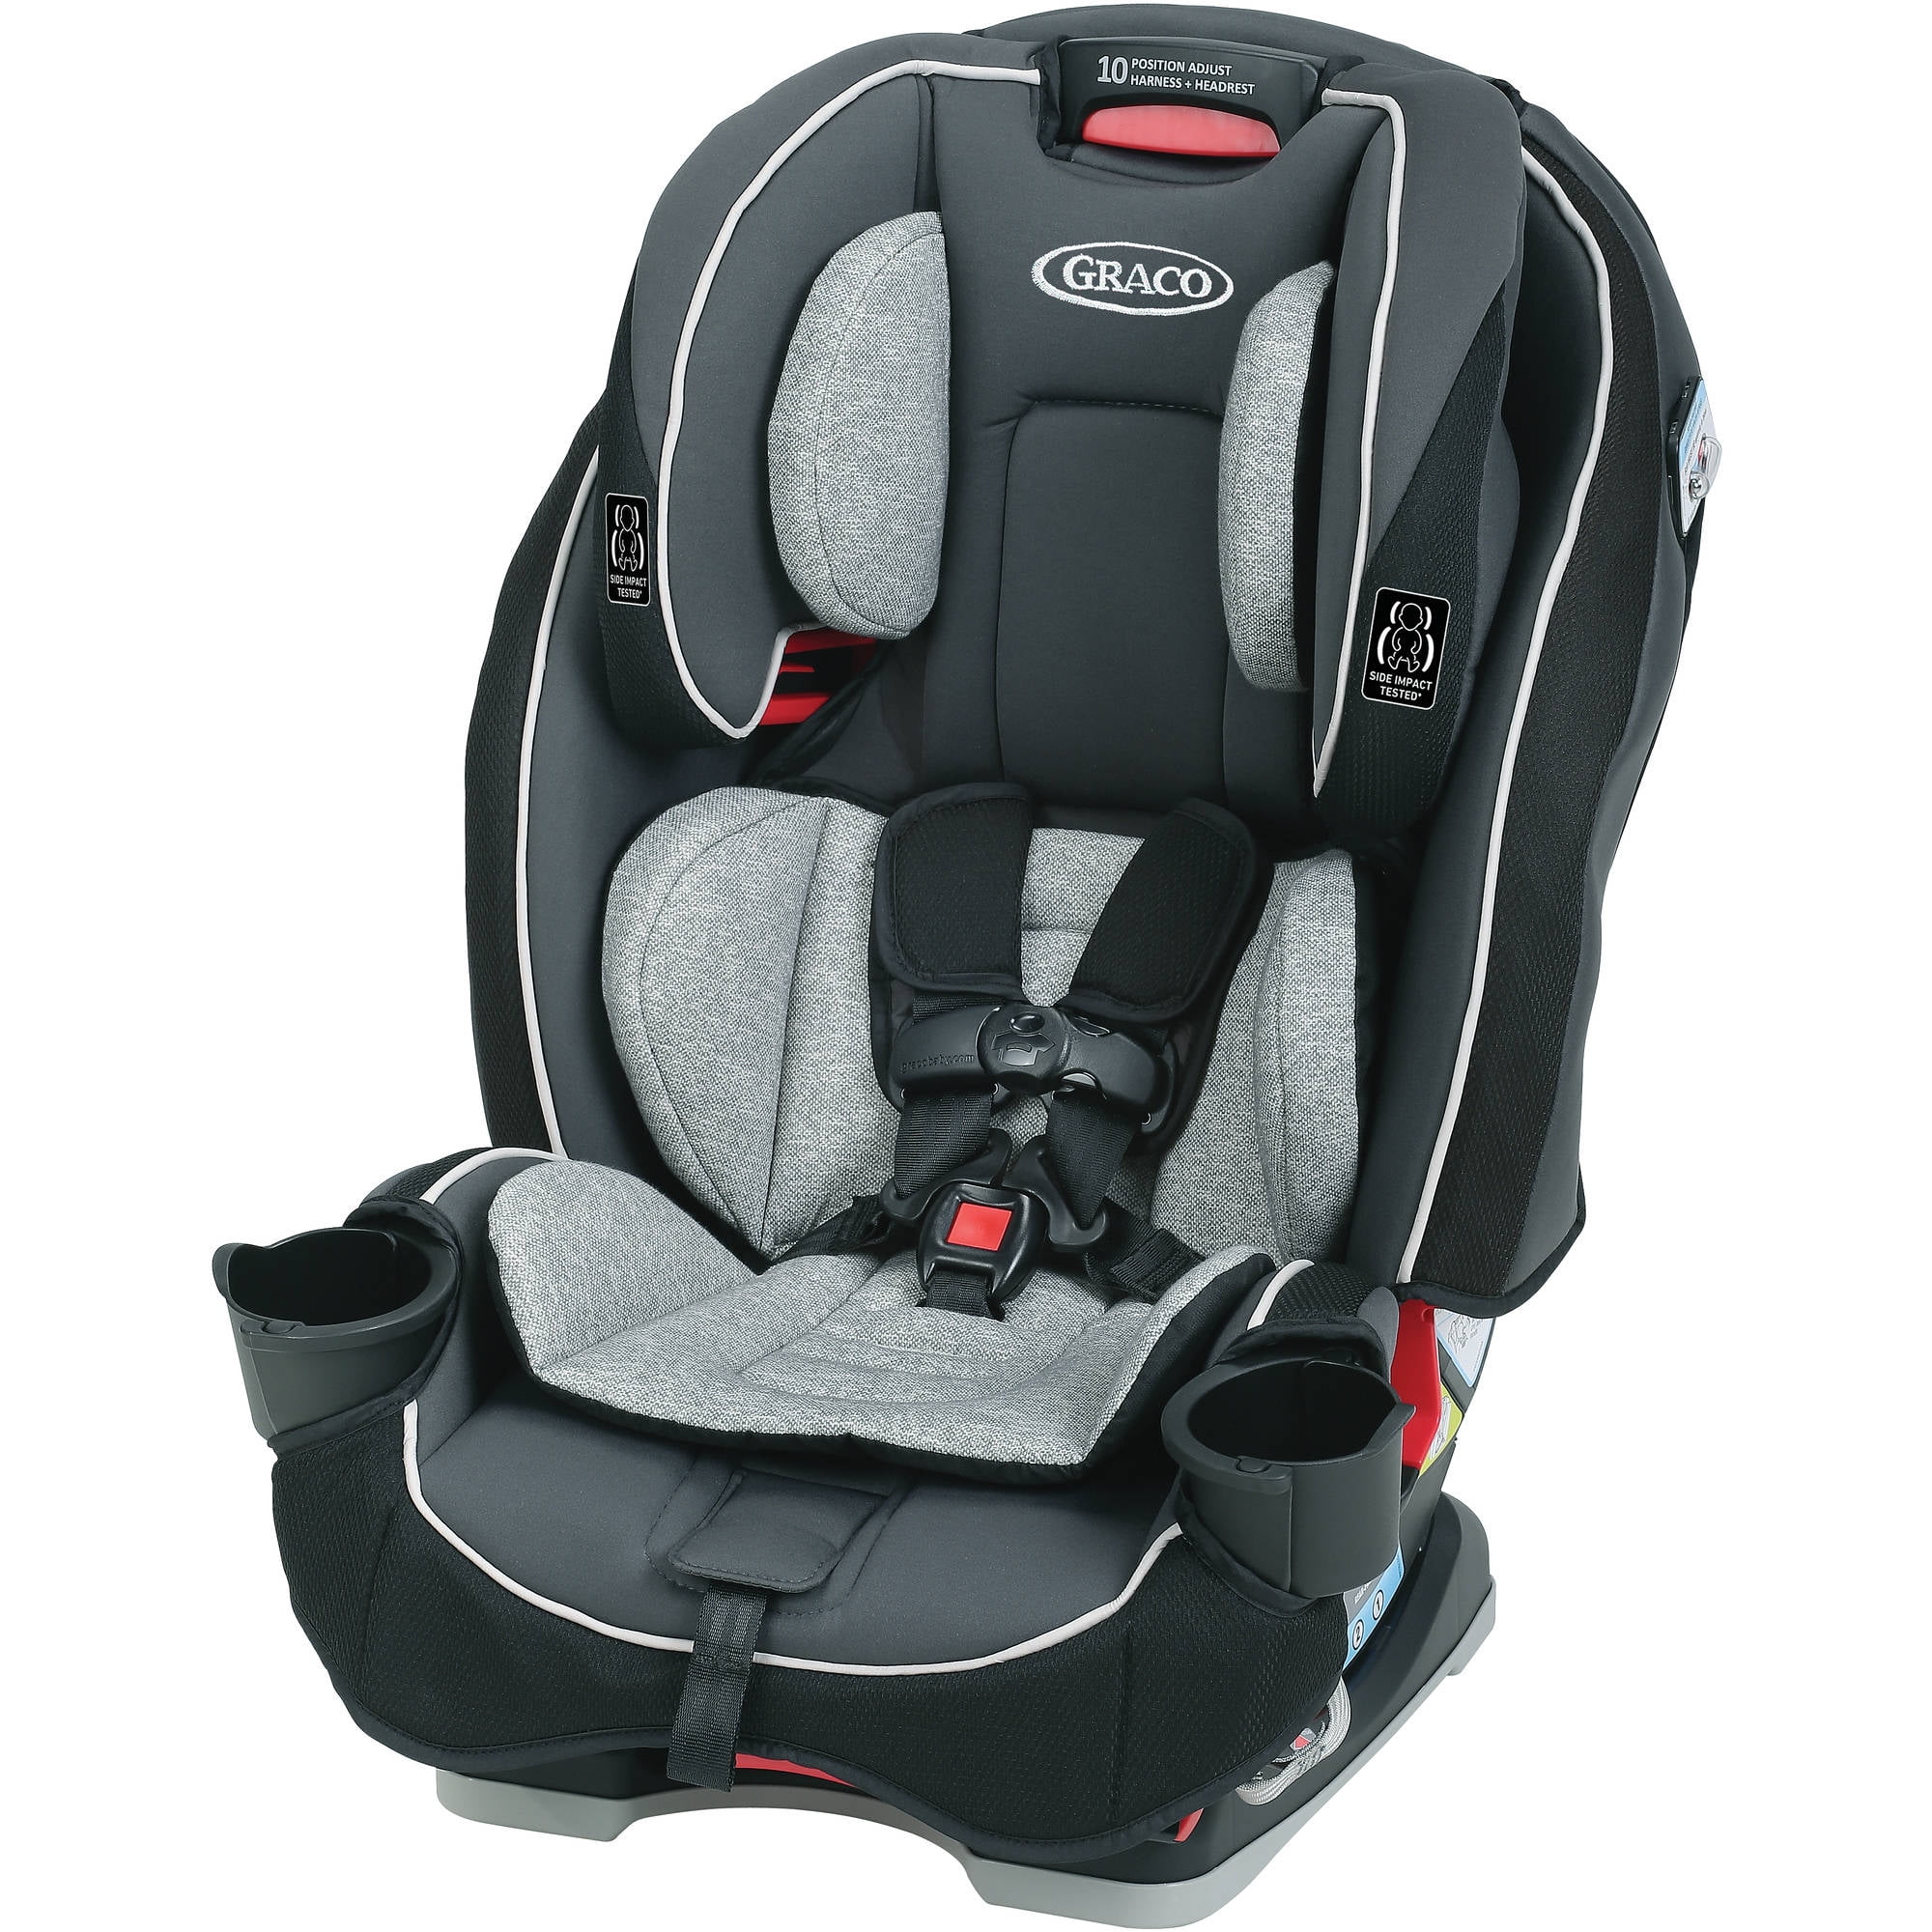 Graco SlimFit All-in-One Convertible Car Seat, Darcie Gray - Walmart